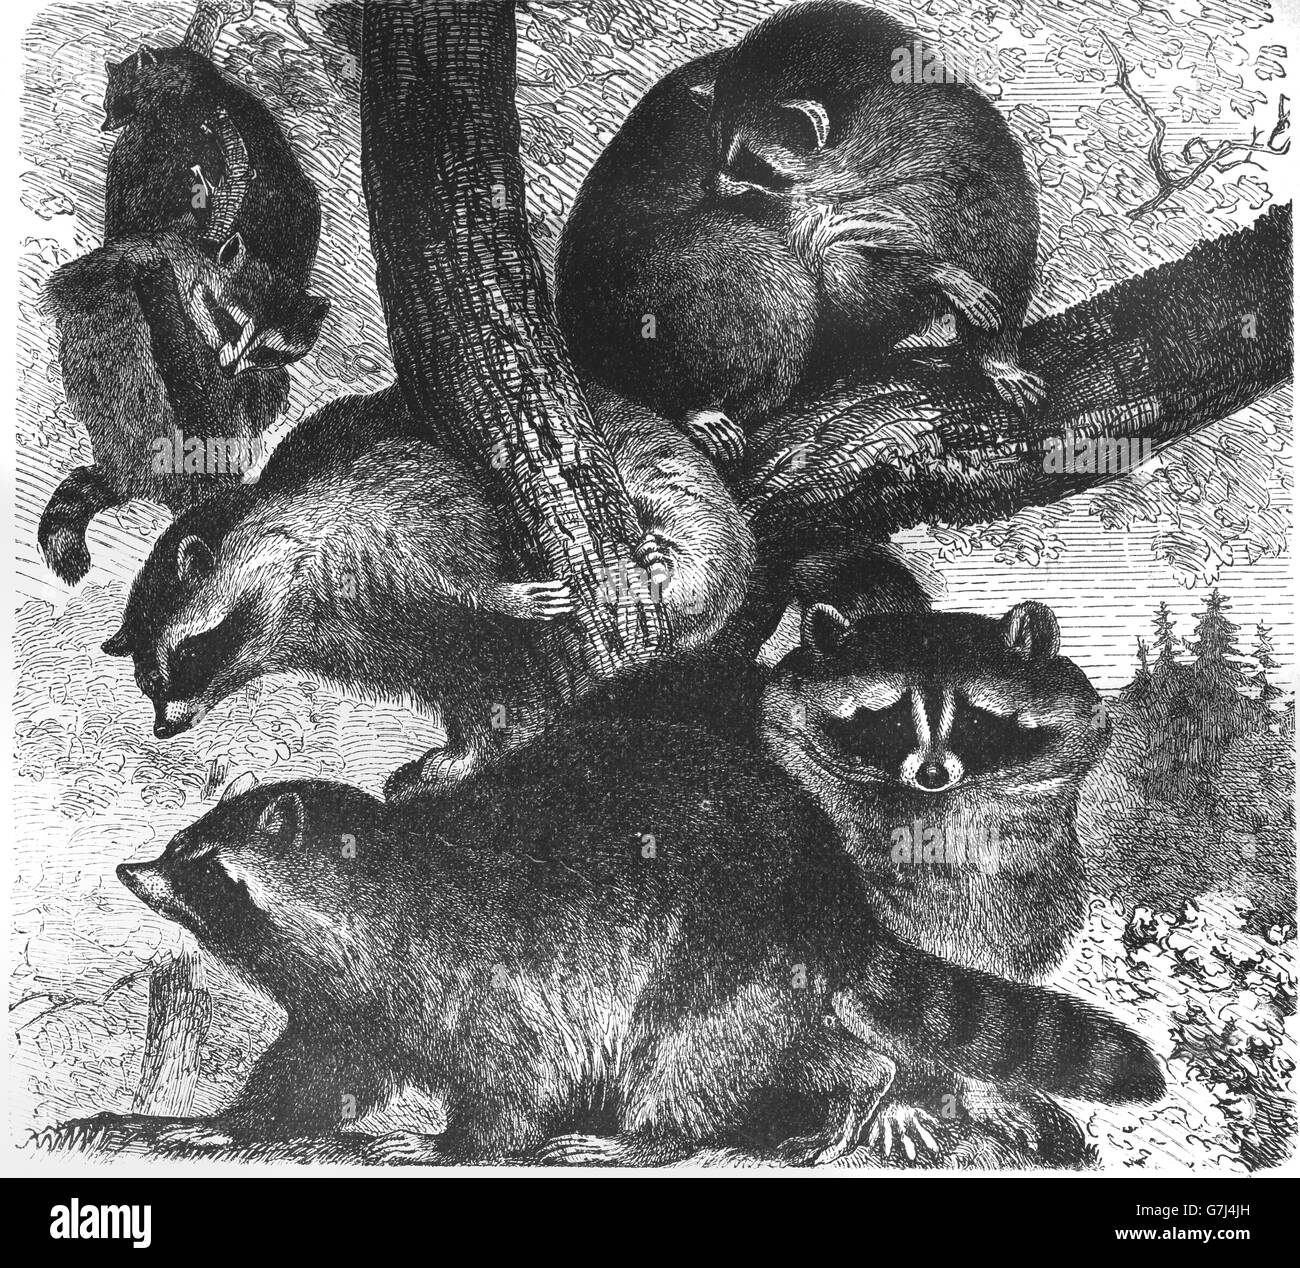 Raccoon, Procyon lotor, illustration from book dated 1904 Stock Photo